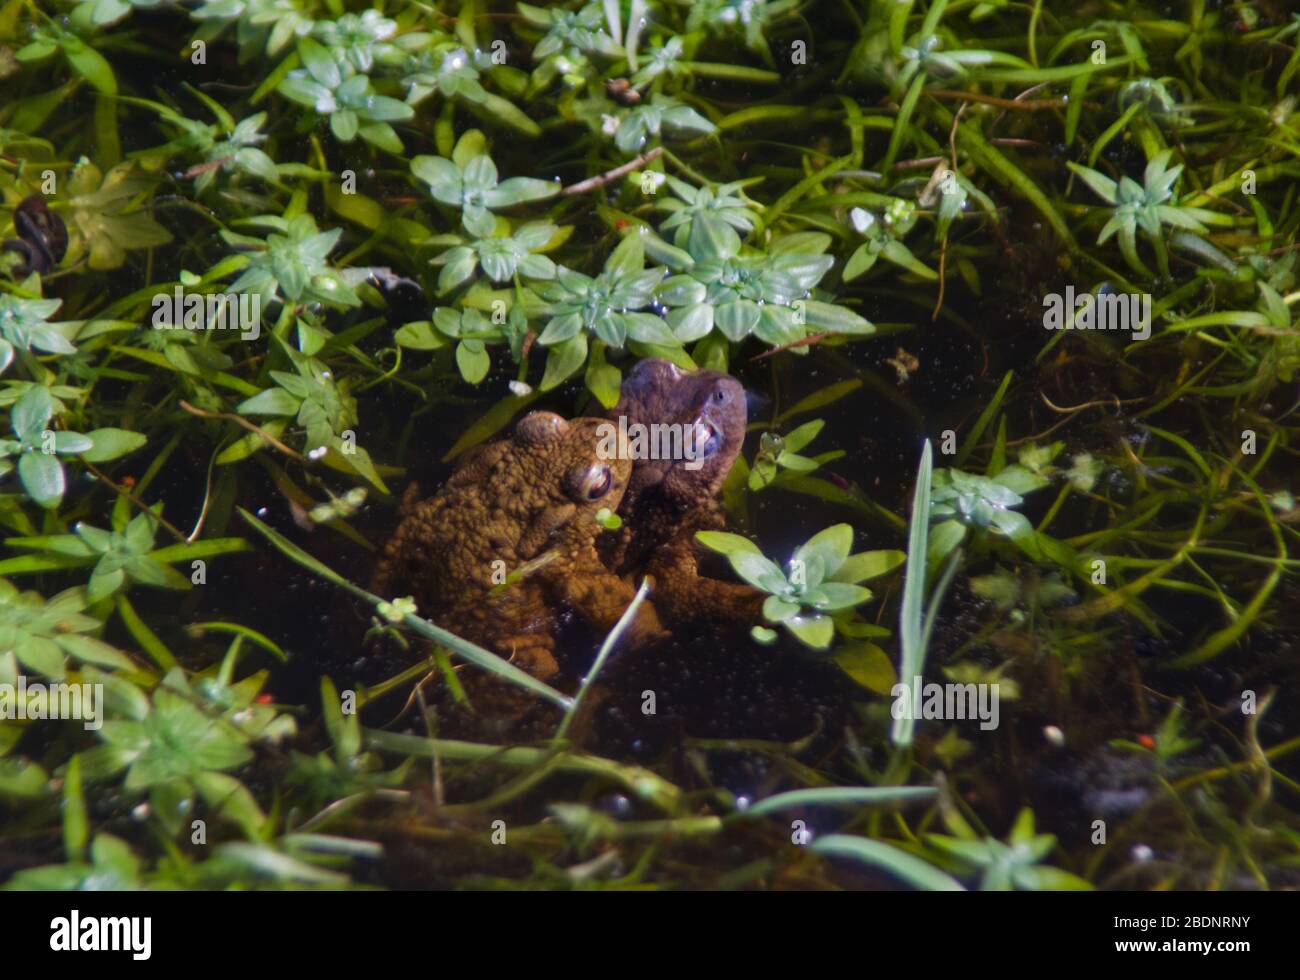 Two Common frogs mating in a pond between aquatic plants Stock Photo